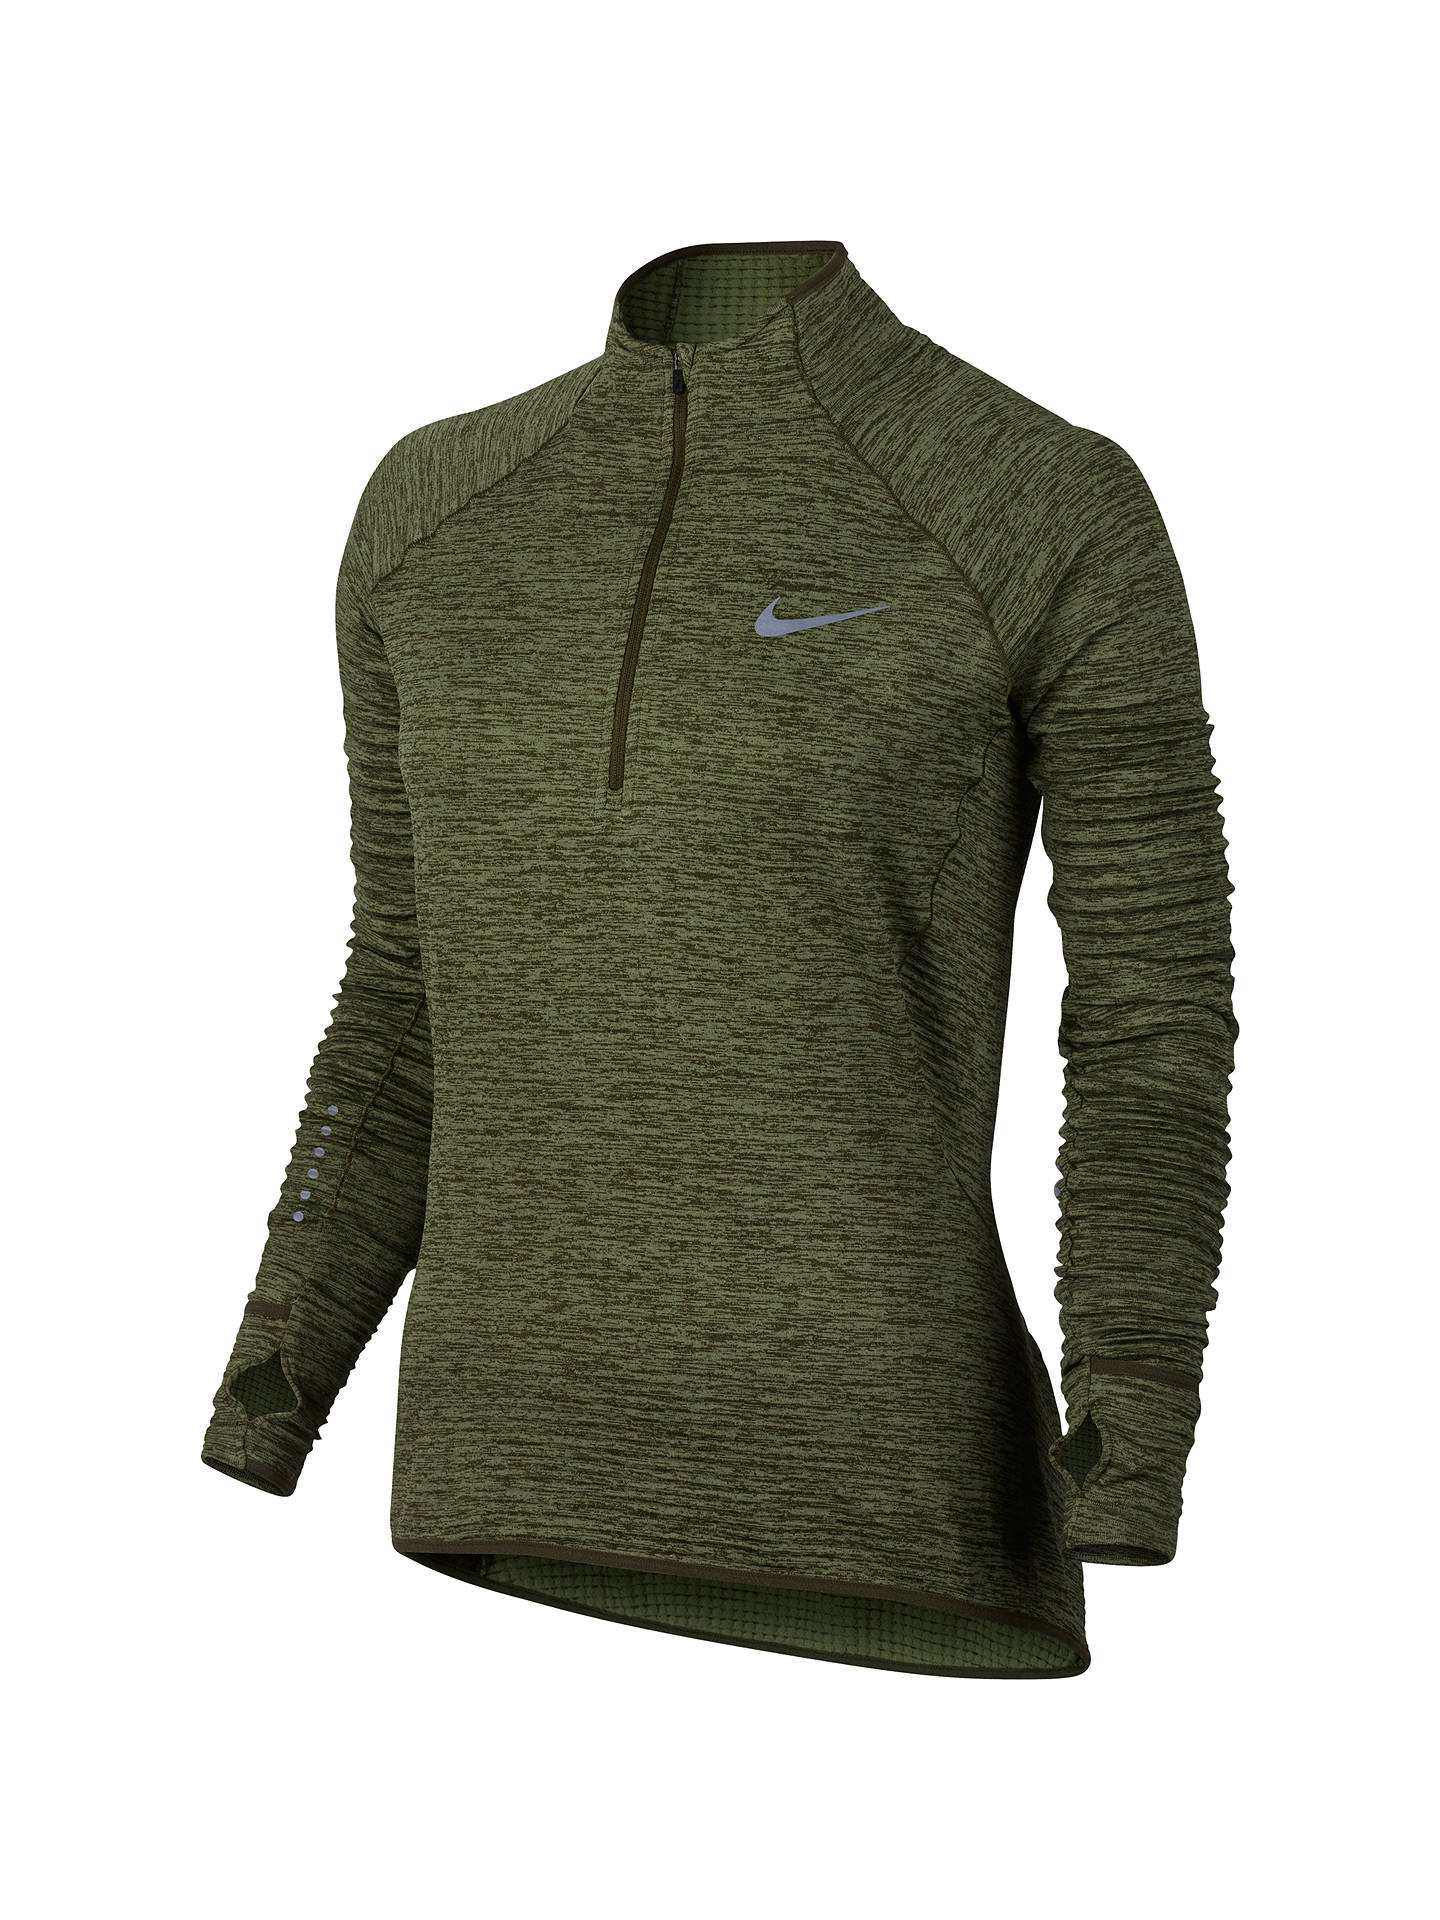 Nike Sphere Element Long Sleeve Running Top, Legion Green/Palm Green at